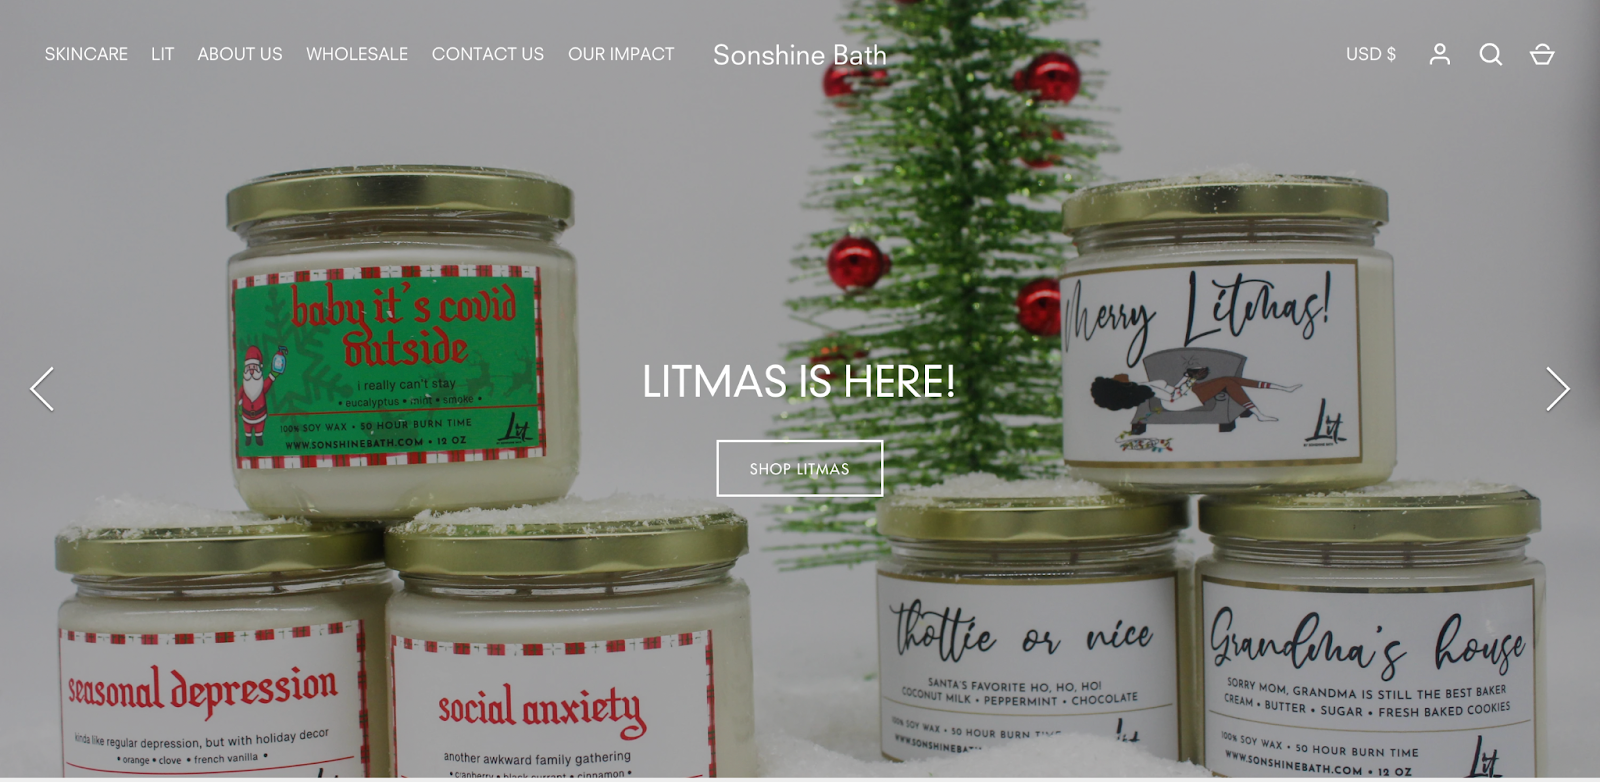 Support Black-owned businesses–A screenshot of Sonshine Bath’s homepage showing their Litmas candle collection with text that reads “LITMAS IS HERE!” 